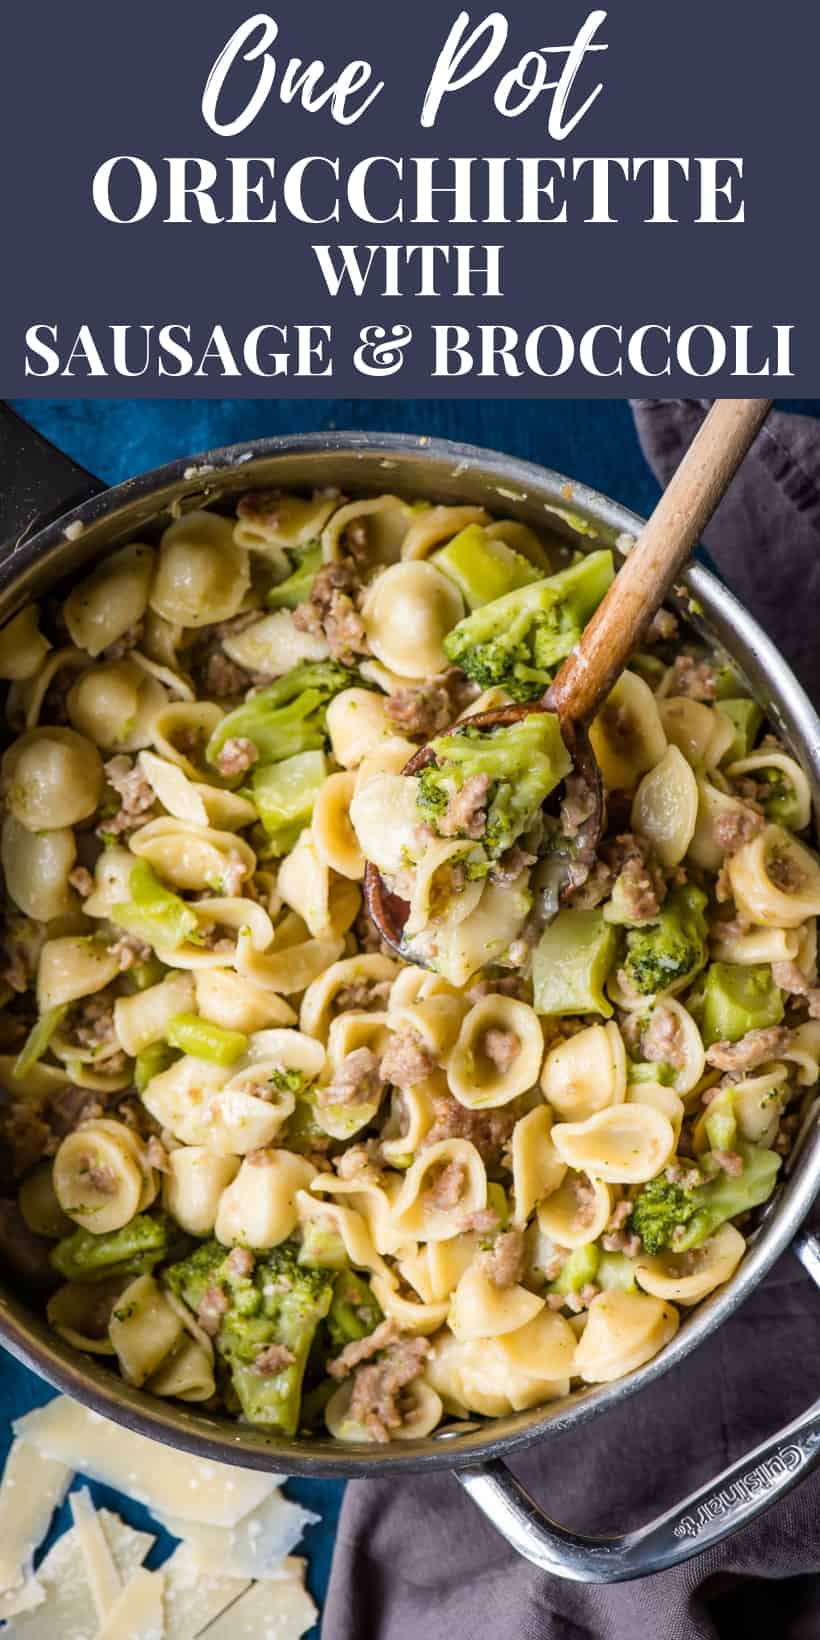 Orecchiette with Sausage and Broccoli cooked in a stainless steel skillet